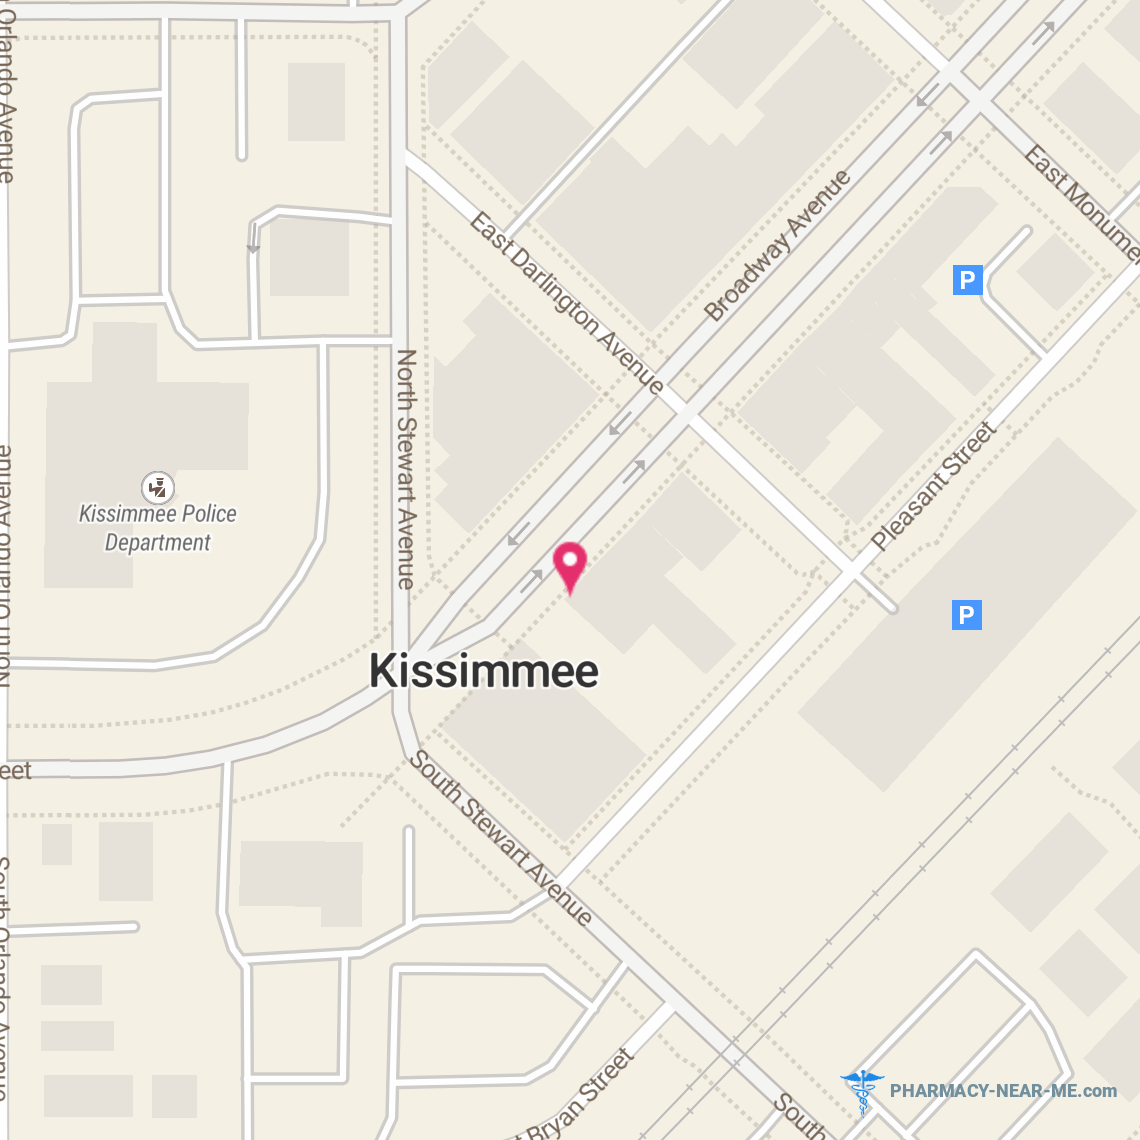 BROADWAY PHARMACY - Pharmacy Hours, Phone, Reviews & Information: 22 Broadway, Kissimmee, Florida 34741, United States